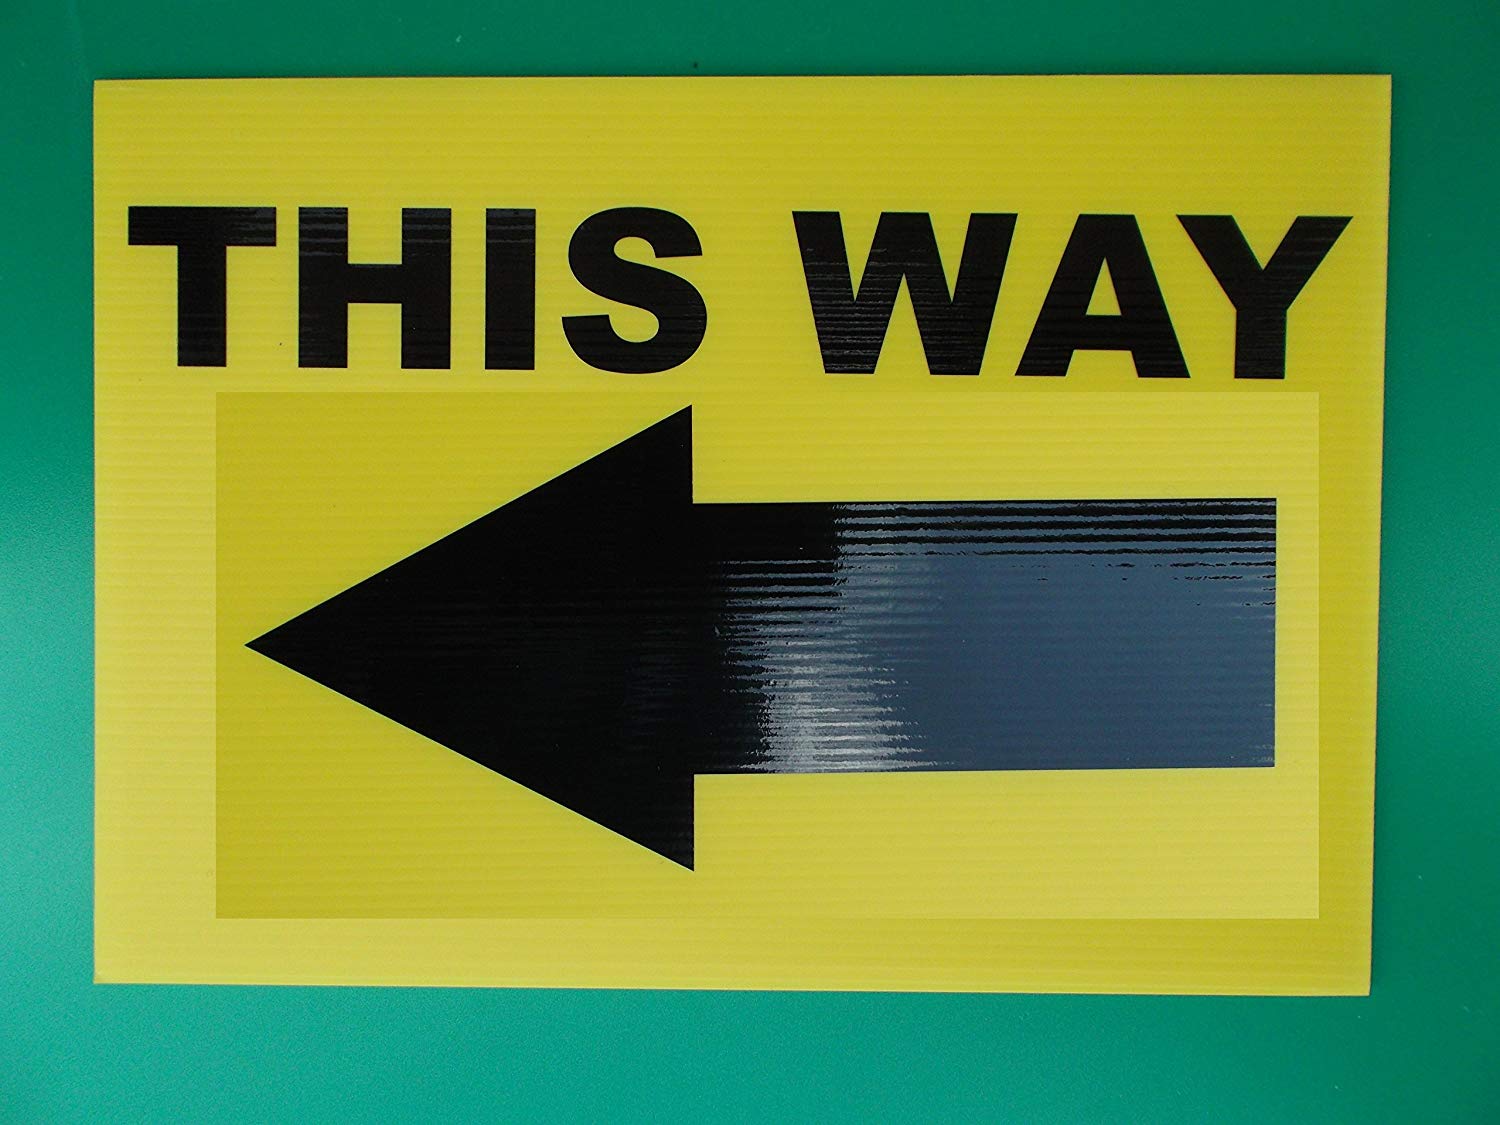 Yellow Way Logo - Event Signage - THIS WAY with Arrow pointing Left - Yellow Direction ...